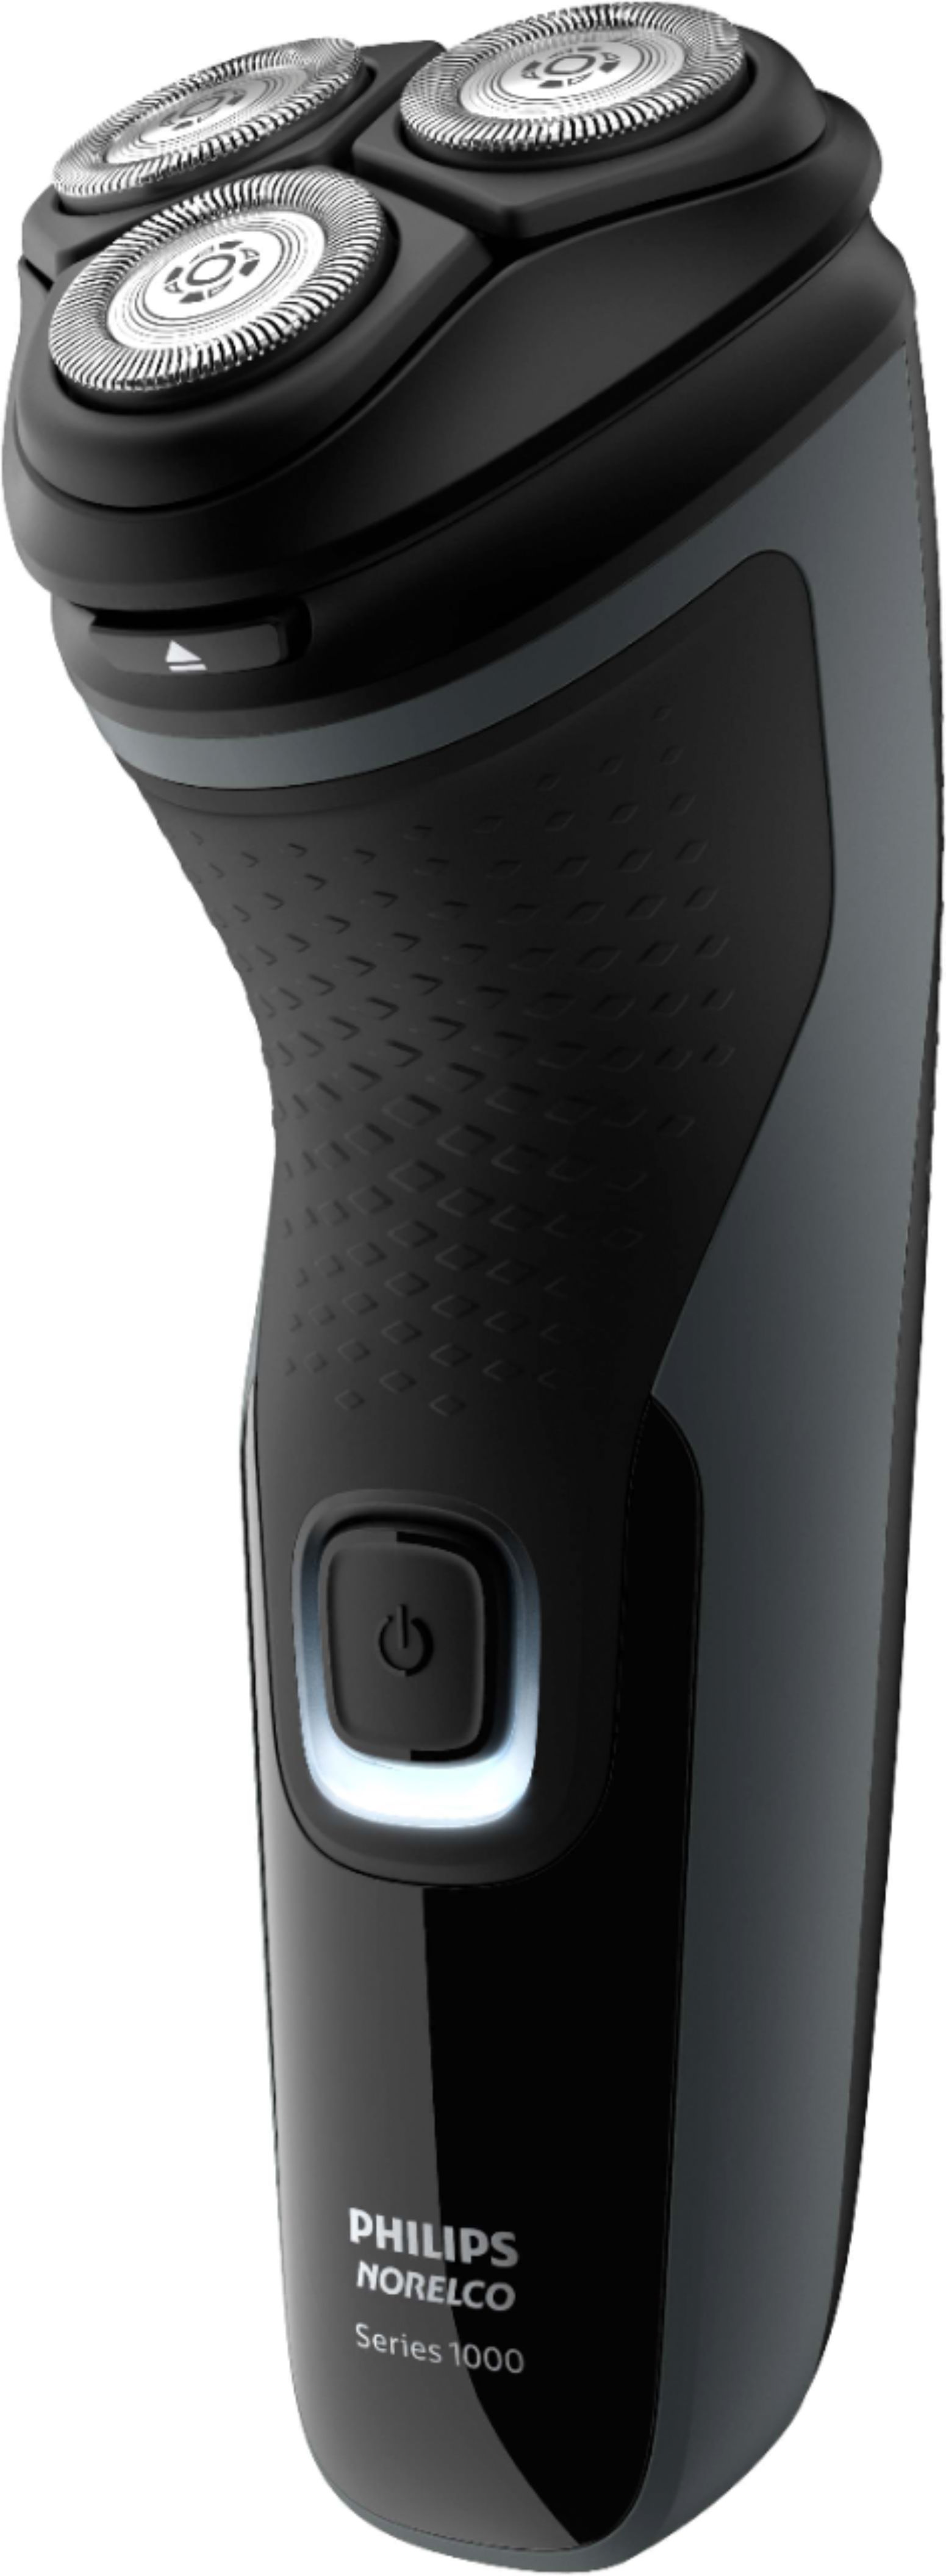 Angle View: Philips Norelco - Norelco Electric Shaver - Slate Gray